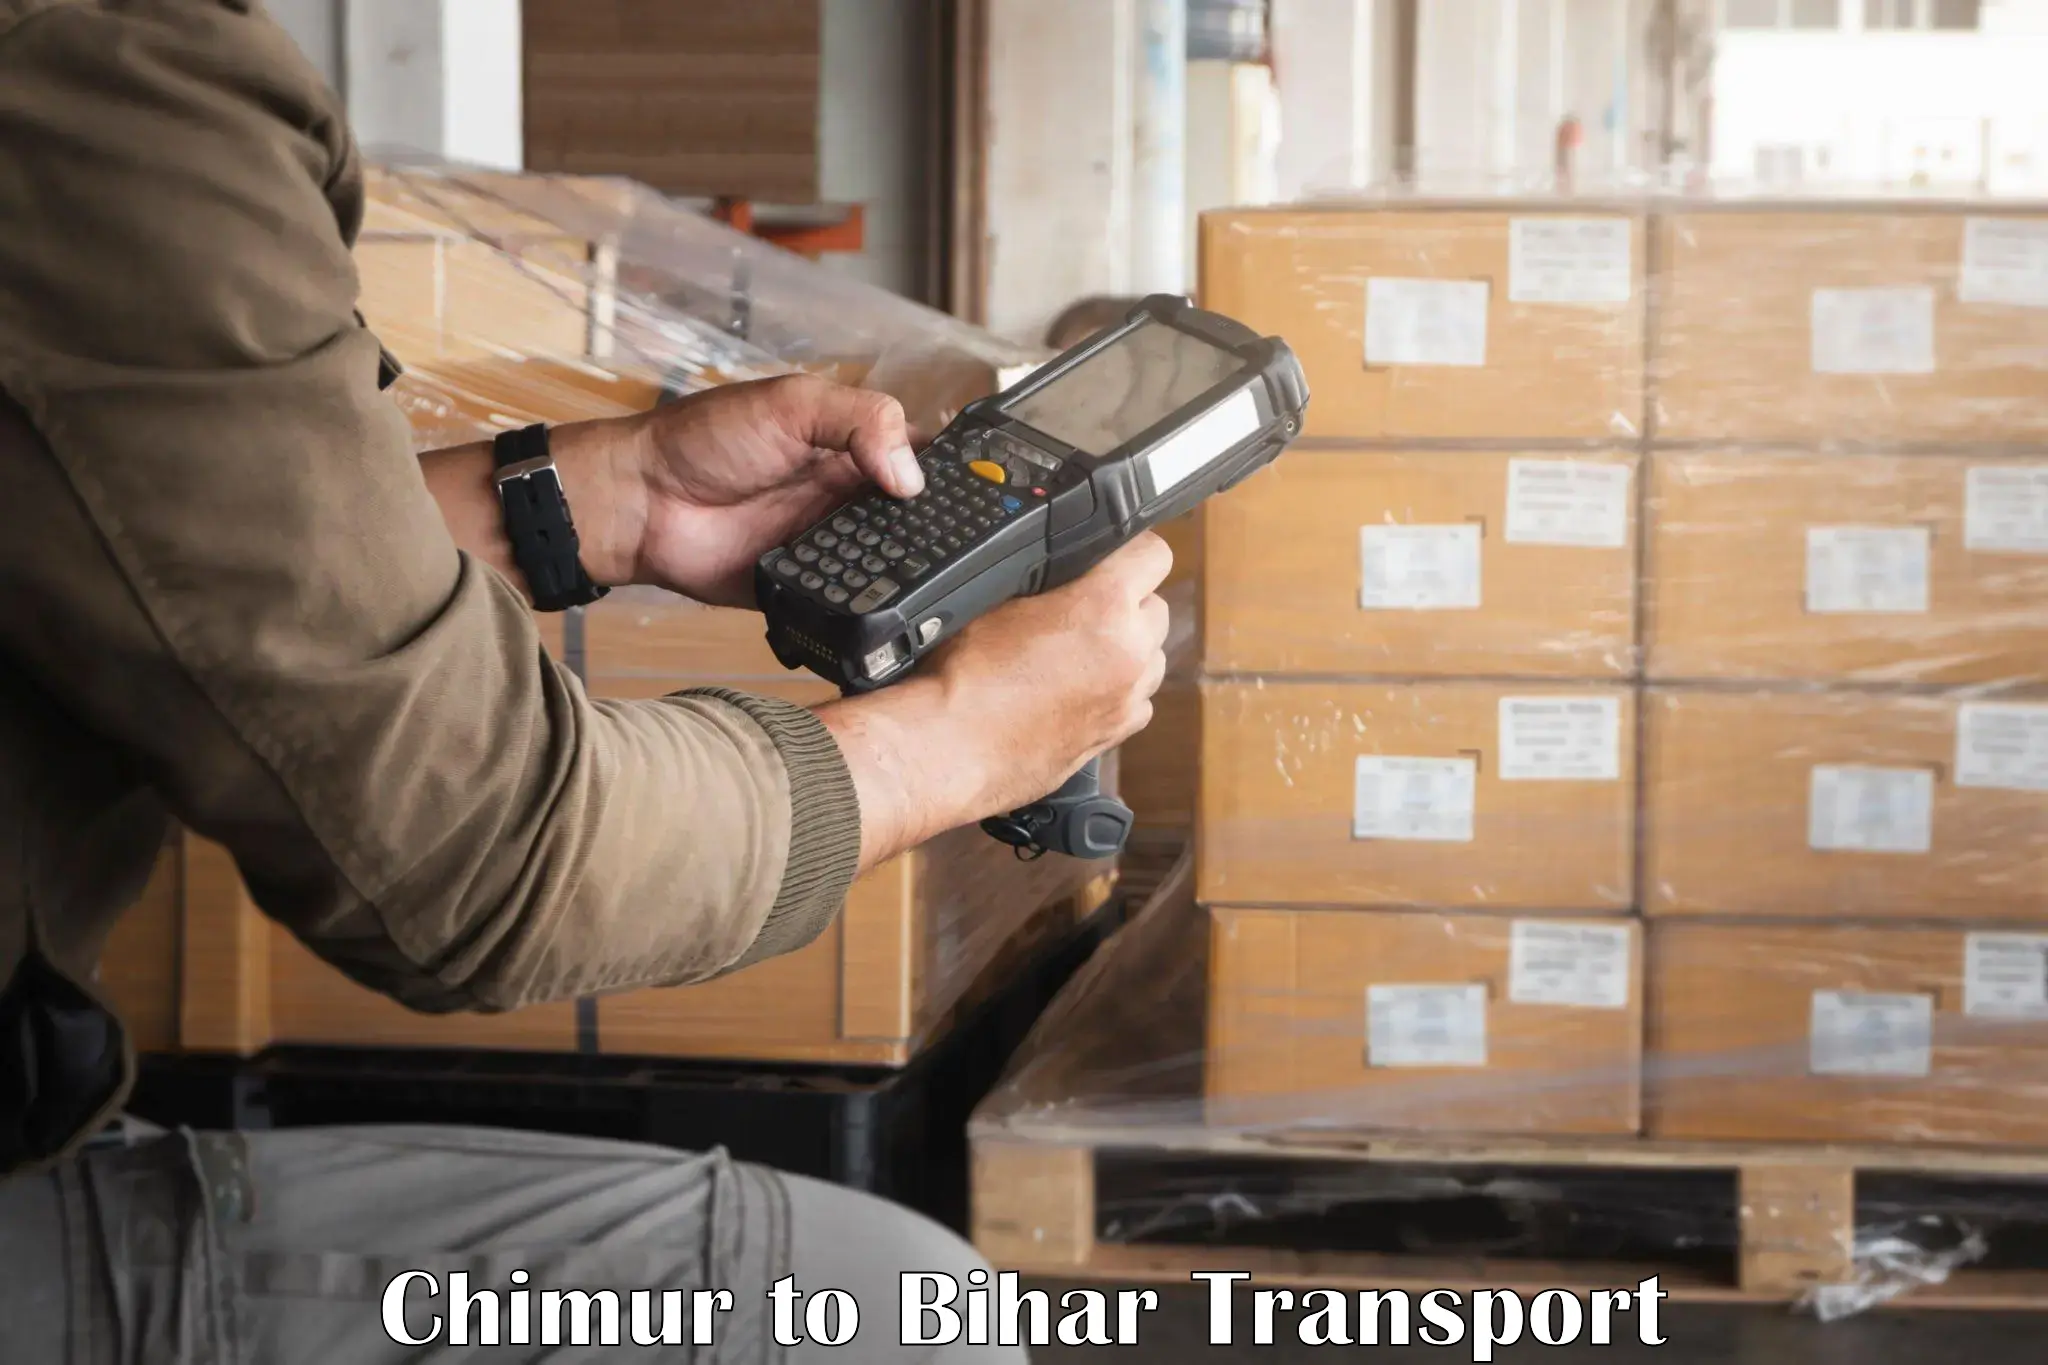 Daily transport service Chimur to Singhia